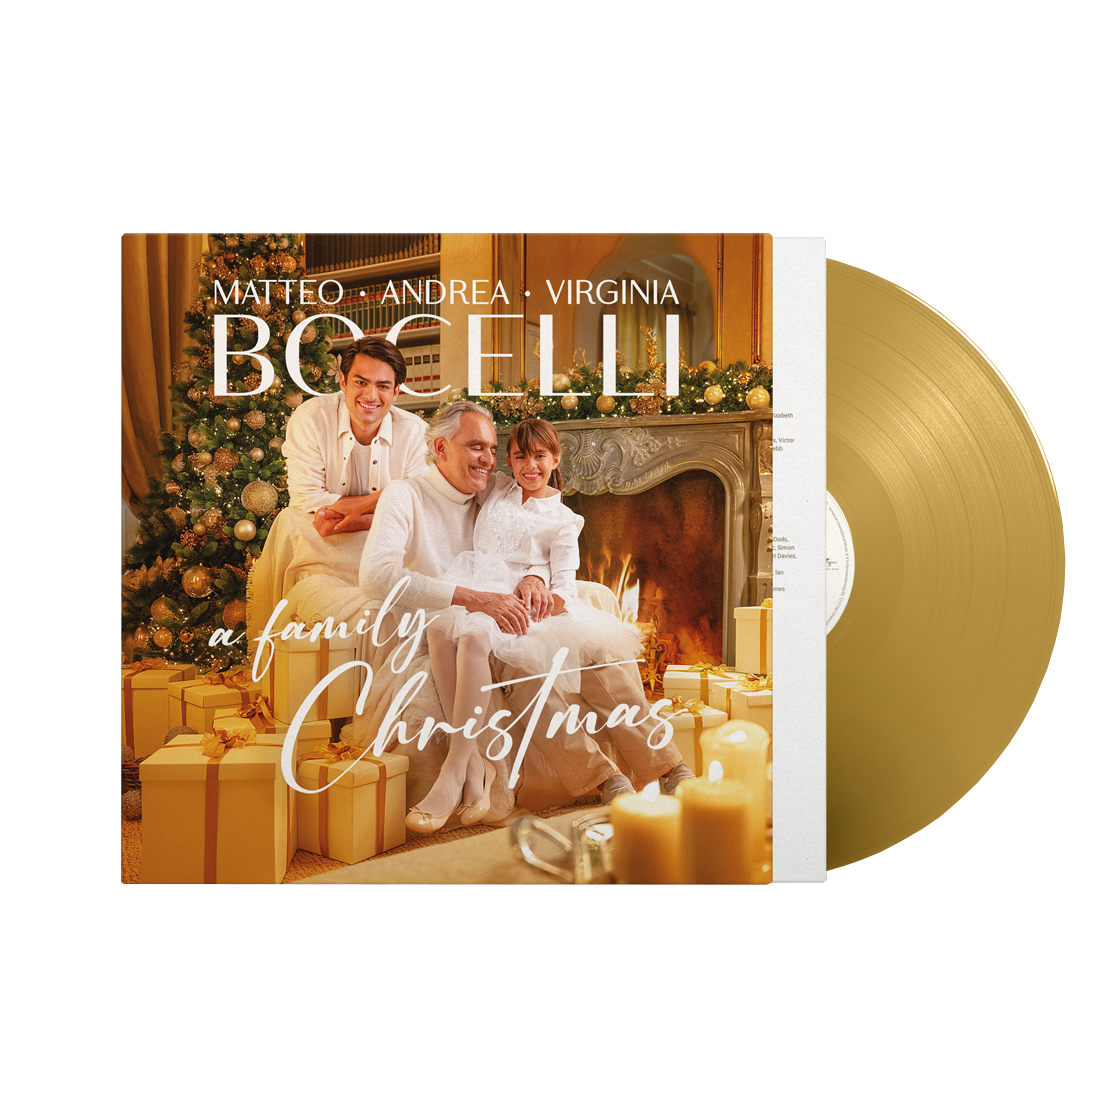 A Family Christmas - Exclusive Gold Vinyl